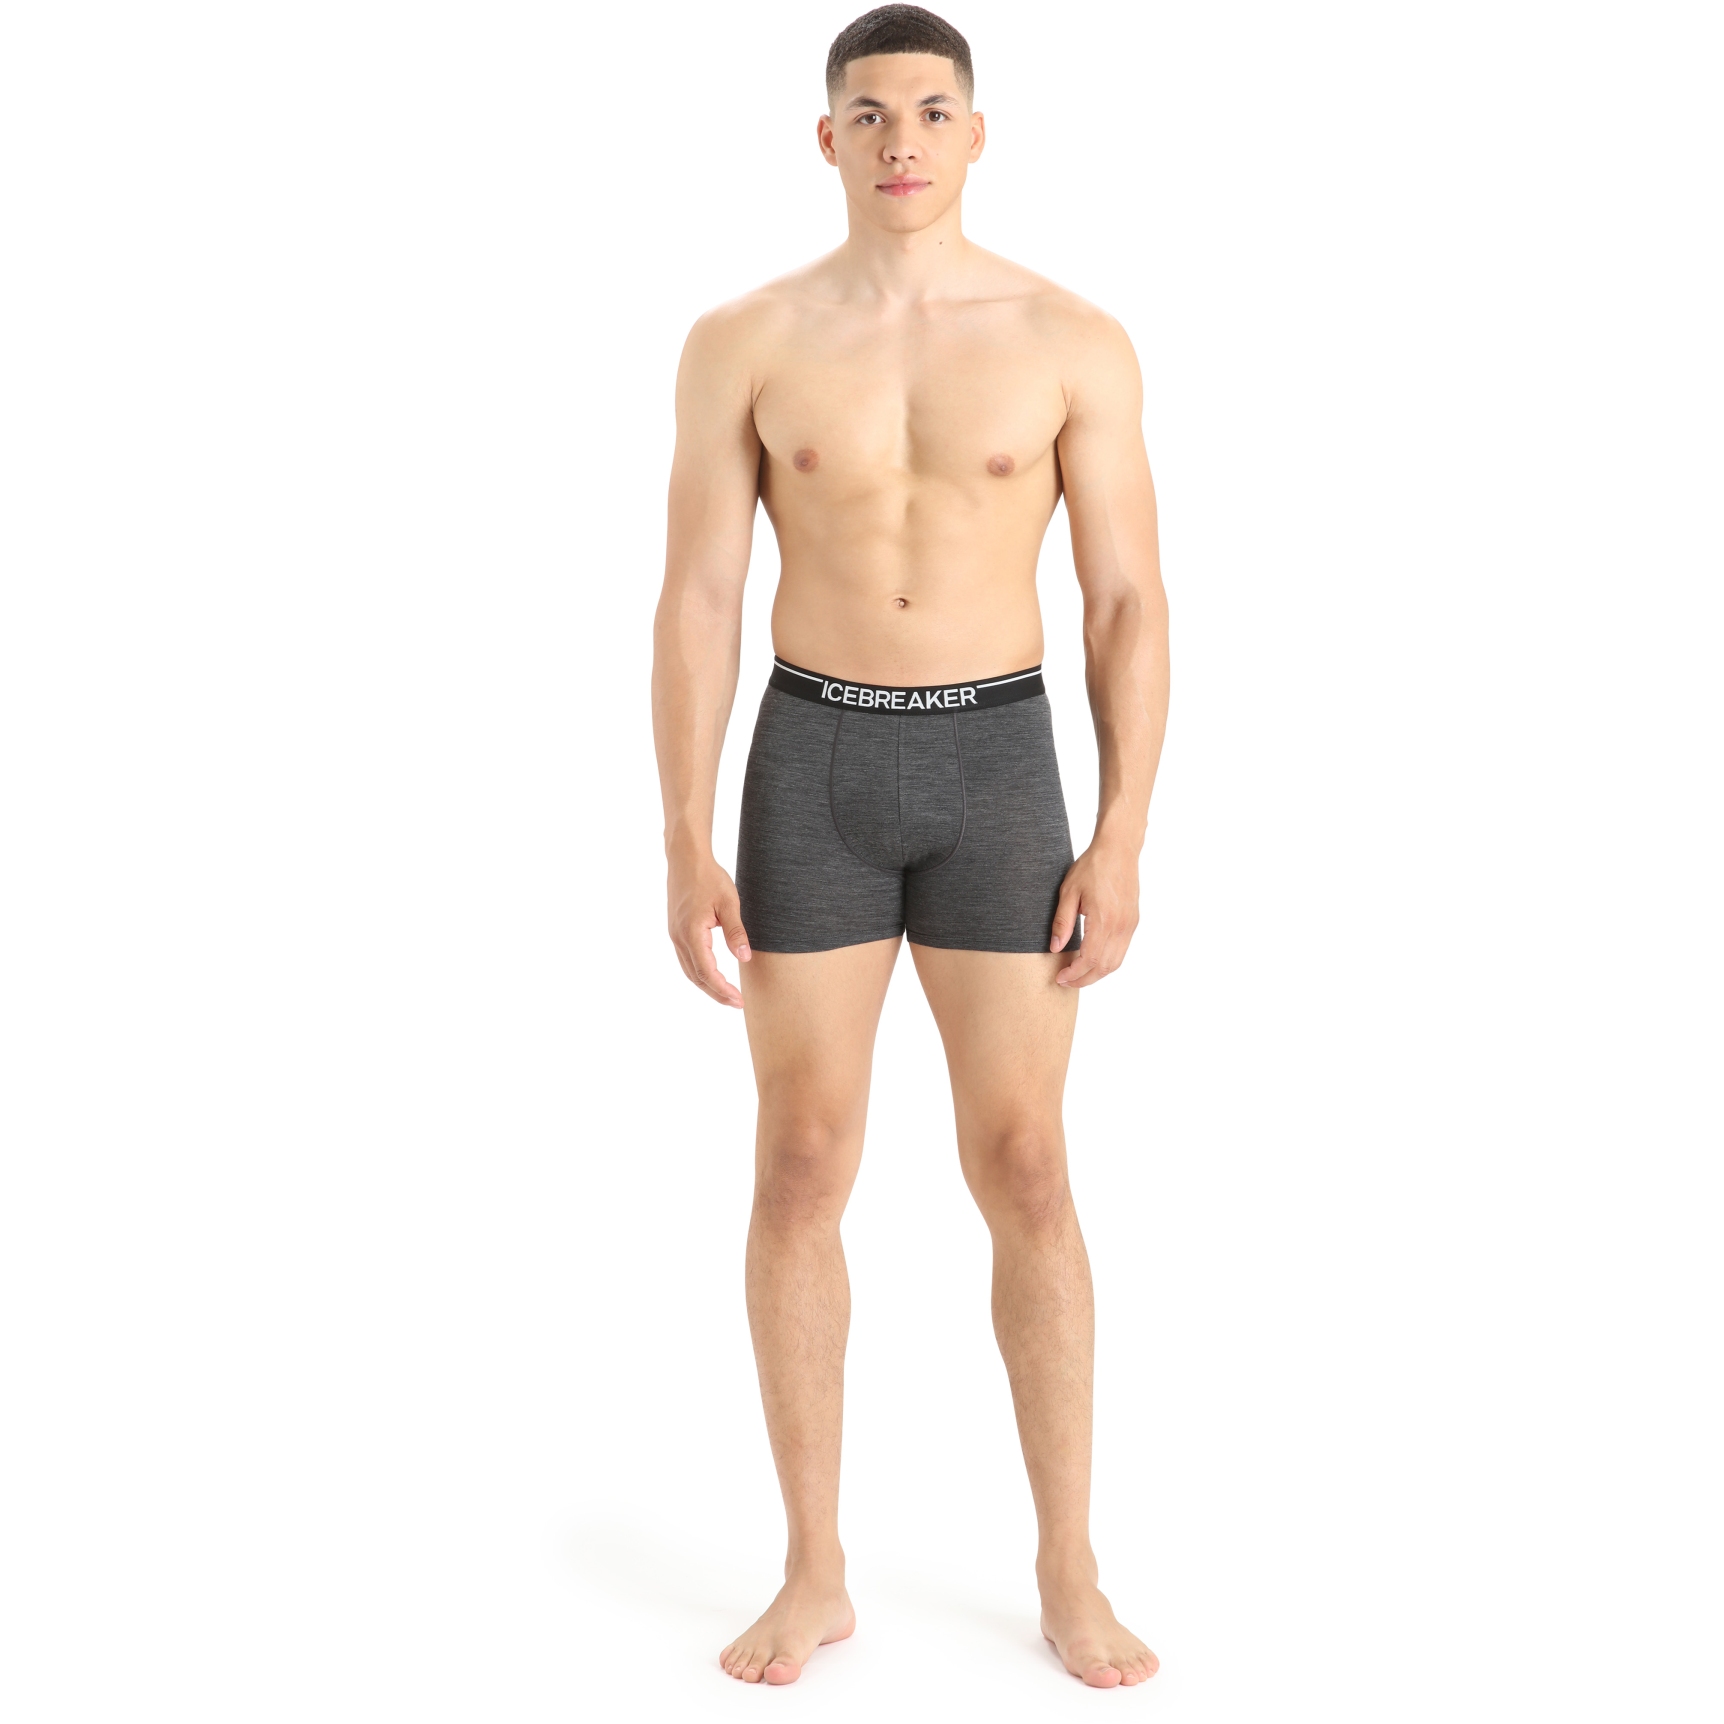 Icebreaker - Anatomica Boxers with Fly - Merino base layer - Jet Heather | S